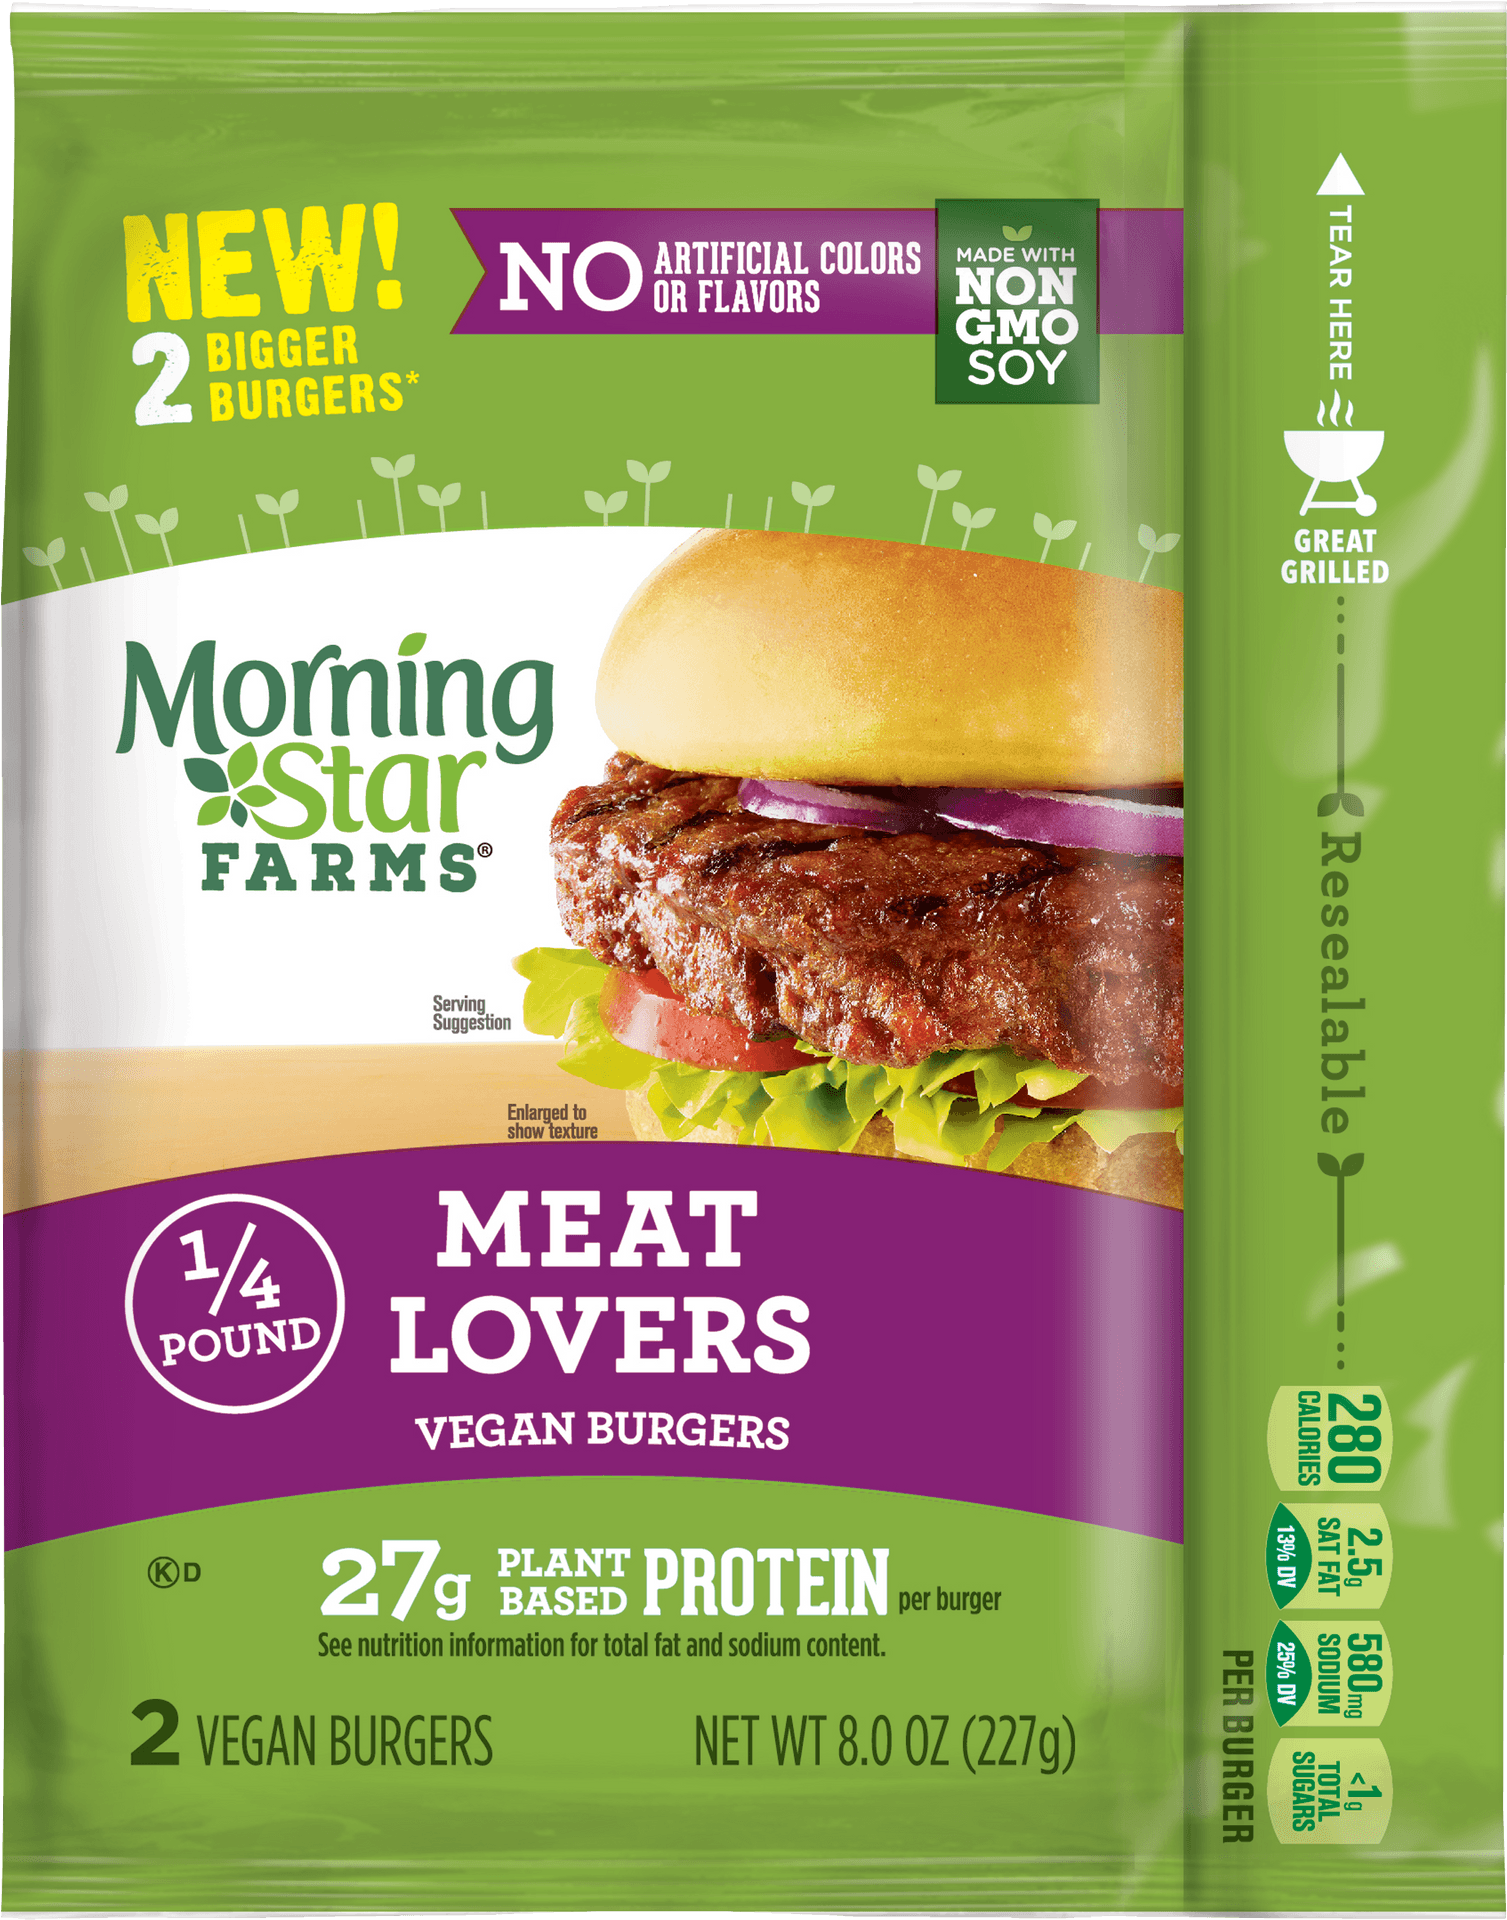 Morning Star Farms Meat Lovers Vegan Burgers Package PNG image